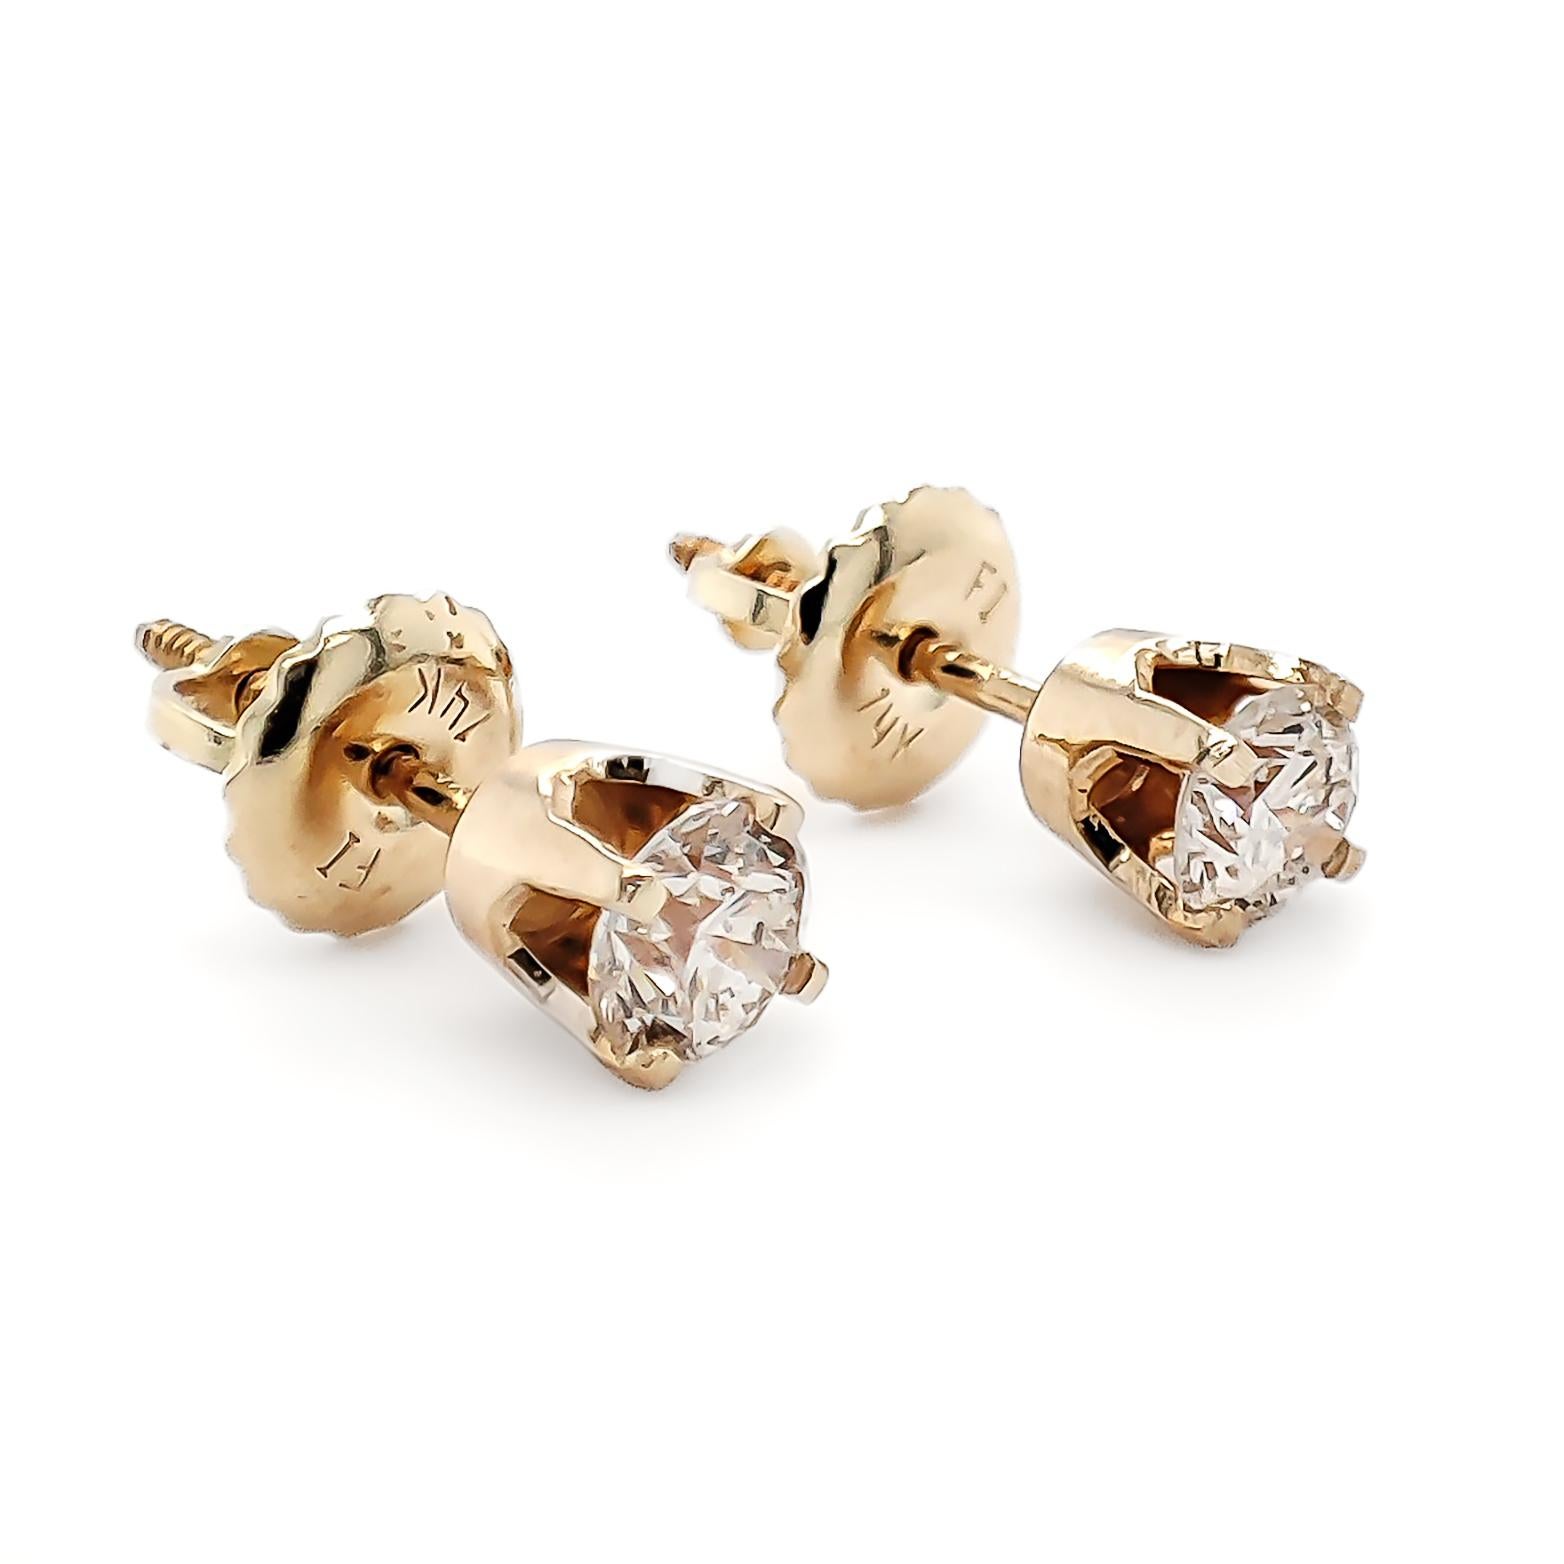 FOR U.S. BUYERS NO VAT 

If you want to add color to any style you choose, these 14kt diamond stud earrings weighing 0.79 grams are definitely for you. These gorgeous earrings feature two round brilliant cuts set in 14kt Yellow gold totaling 0.50